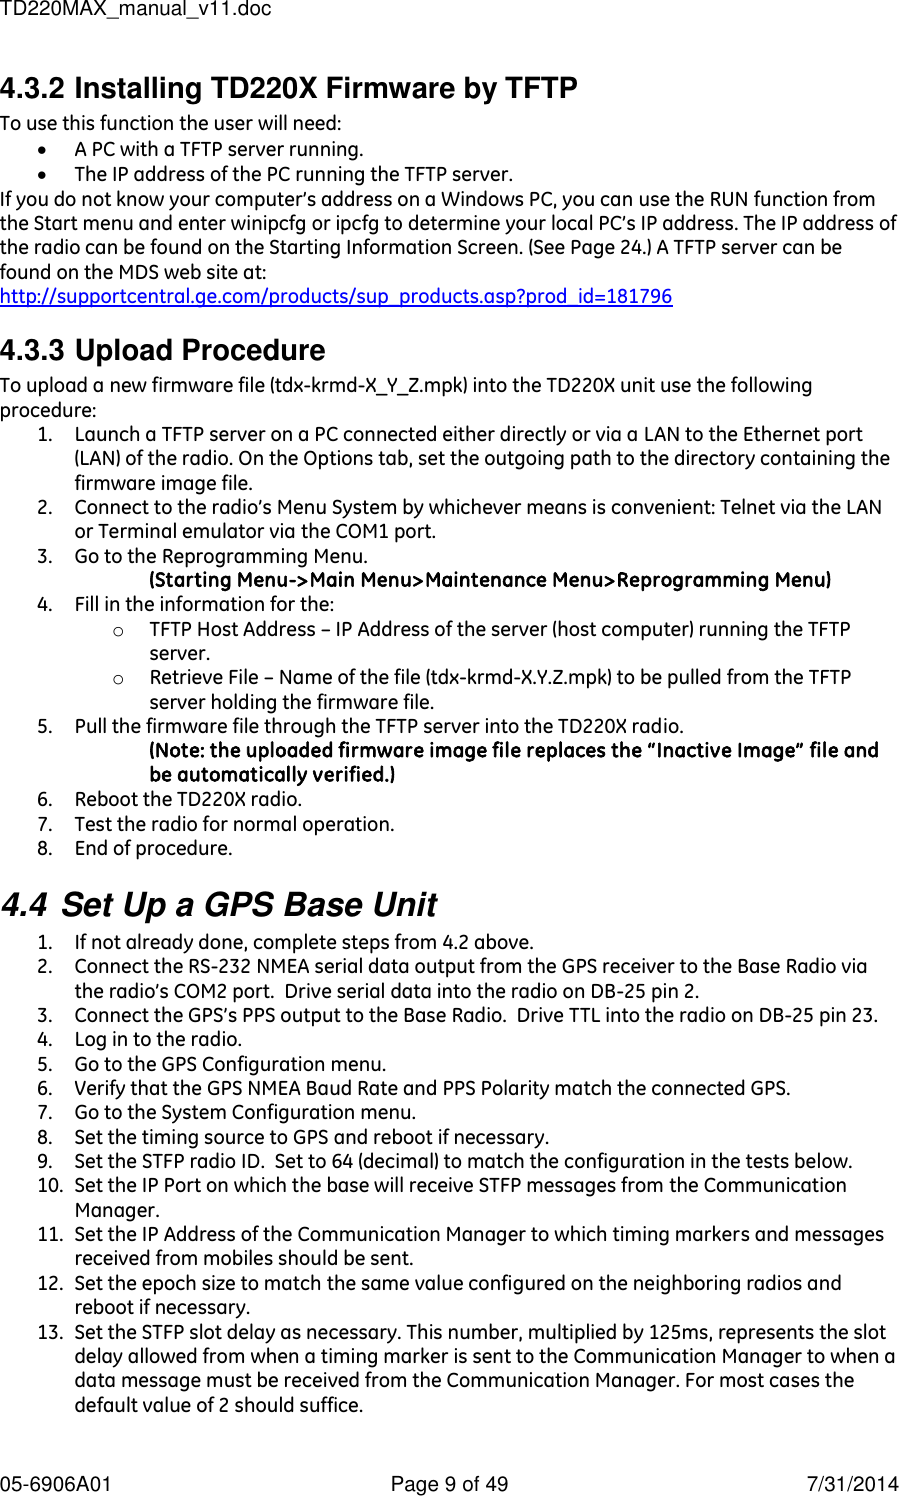 TD220MAX_manual_v11.doc 05-6906A01  Page 9 of 49  7/31/2014 4.3.2 Installing TD220X Firmware by TFTP To use this function the user will need:  A PC with a TFTP server running.  The IP address of the PC running the TFTP server. If you do not know your computer’s address on a Windows PC, you can use the RUN function from the Start menu and enter winipcfg or ipcfg to determine your local PC’s IP address. The IP address of the radio can be found on the Starting Information Screen. (See Page 24.) A TFTP server can be found on the MDS web site at:  http://supportcentral.ge.com/products/sup_products.asp?prod_id=181796 4.3.3 Upload Procedure To upload a new firmware file (tdx-krmd-X_Y_Z.mpk) into the TD220X unit use the following procedure: 1. Launch a TFTP server on a PC connected either directly or via a LAN to the Ethernet port (LAN) of the radio. On the Options tab, set the outgoing path to the directory containing the firmware image file. 2. Connect to the radio’s Menu System by whichever means is convenient: Telnet via the LAN or Terminal emulator via the COM1 port. 3. Go to the Reprogramming Menu. (Starting Menu-&gt;Main Menu&gt;Maintenance Menu&gt;Reprogramming Menu)  4. Fill in the information for the: o TFTP Host Address – IP Address of the server (host computer) running the TFTP server. o Retrieve File – Name of the file (tdx-krmd-X.Y.Z.mpk) to be pulled from the TFTP server holding the firmware file. 5. Pull the firmware file through the TFTP server into the TD220X radio.  (Note: the uploaded firmware image file replaces the “Inactive Image” file and be automatically verified.) 6. Reboot the TD220X radio. 7. Test the radio for normal operation. 8. End of procedure. 4.4 Set Up a GPS Base Unit 1. If not already done, complete steps from 4.2 above. 2. Connect the RS-232 NMEA serial data output from the GPS receiver to the Base Radio via the radio’s COM2 port.  Drive serial data into the radio on DB-25 pin 2. 3. Connect the GPS’s PPS output to the Base Radio.  Drive TTL into the radio on DB-25 pin 23. 4. Log in to the radio. 5. Go to the GPS Configuration menu. 6. Verify that the GPS NMEA Baud Rate and PPS Polarity match the connected GPS. 7. Go to the System Configuration menu. 8. Set the timing source to GPS and reboot if necessary. 9. Set the STFP radio ID.  Set to 64 (decimal) to match the configuration in the tests below. 10. Set the IP Port on which the base will receive STFP messages from the Communication Manager. 11. Set the IP Address of the Communication Manager to which timing markers and messages received from mobiles should be sent. 12. Set the epoch size to match the same value configured on the neighboring radios and reboot if necessary. 13. Set the STFP slot delay as necessary. This number, multiplied by 125ms, represents the slot delay allowed from when a timing marker is sent to the Communication Manager to when a data message must be received from the Communication Manager. For most cases the default value of 2 should suffice.  